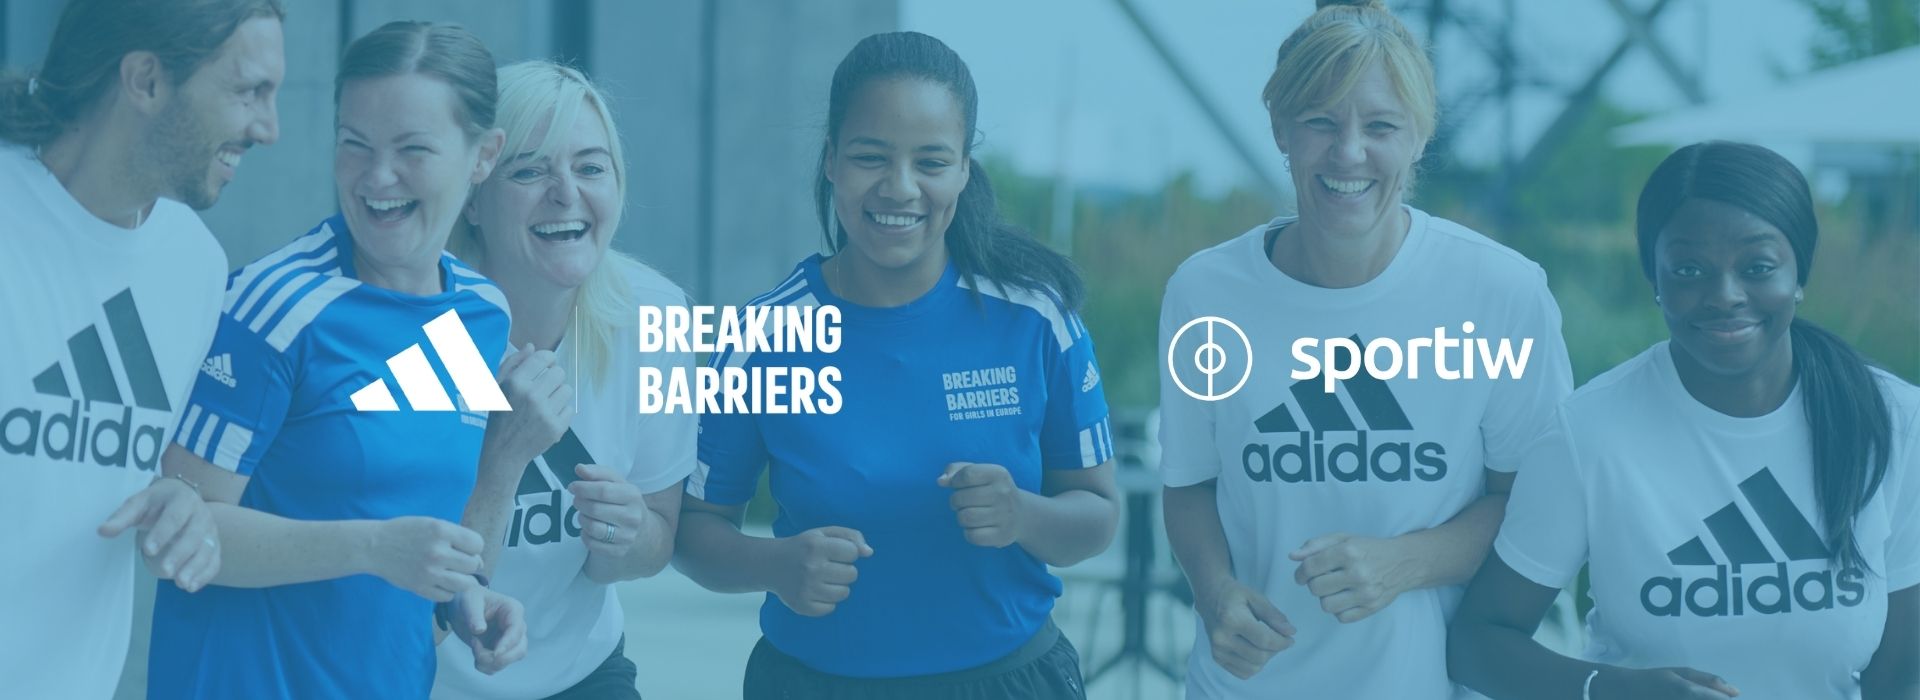 Adidas breaking barriers sportiw concours